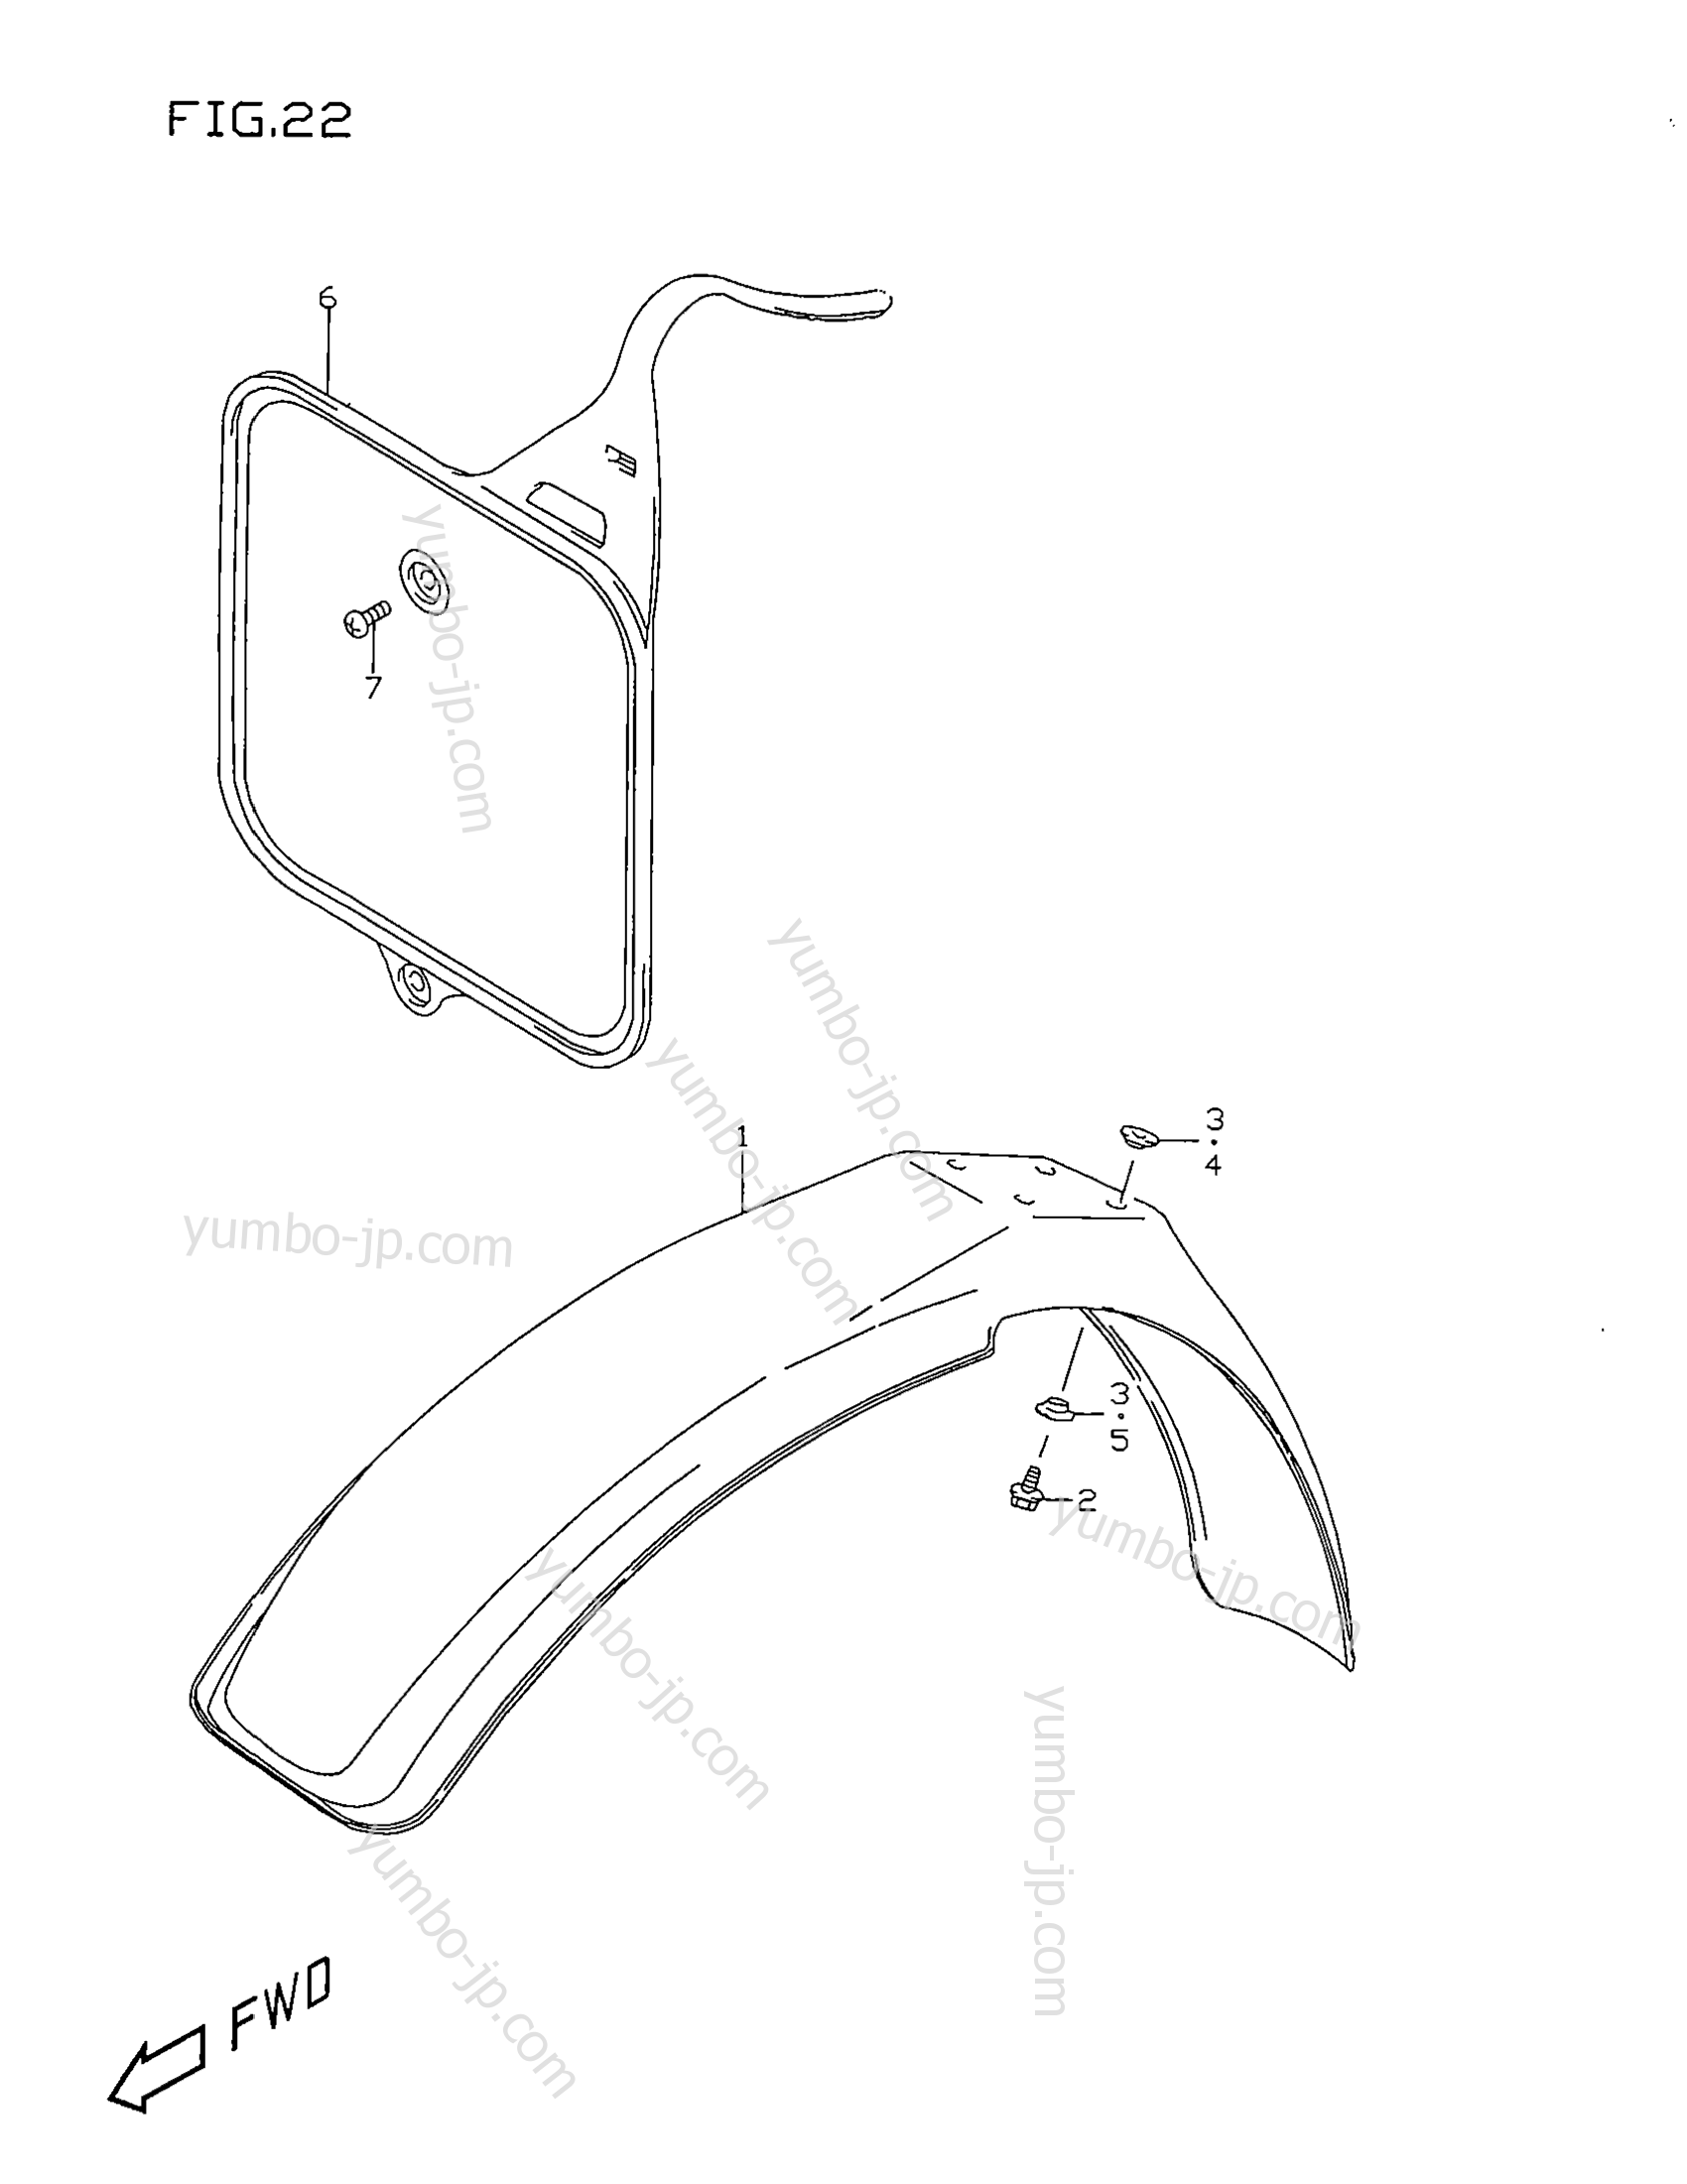 FRONT FENDER for motorcycles SUZUKI RM80 1996 year